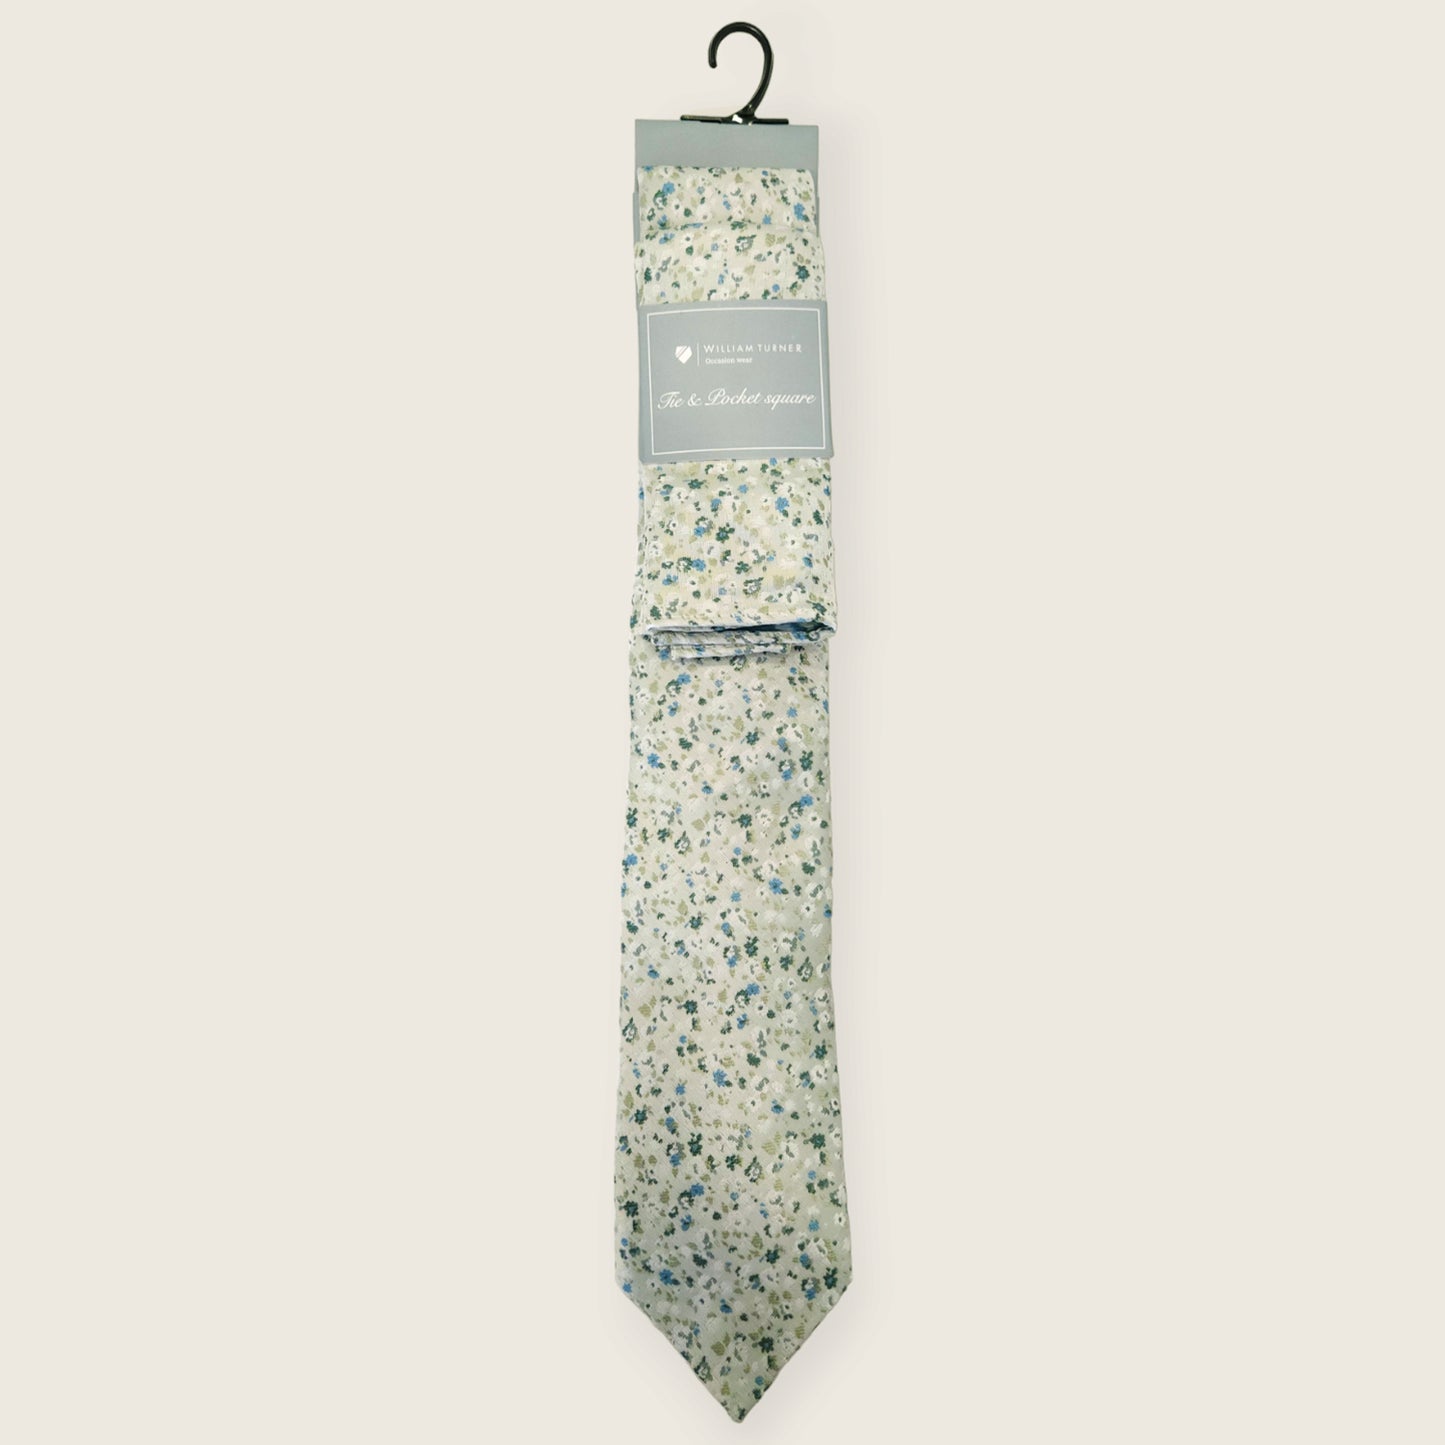 Tie and Hankie Set - Floral Mint Green I169697